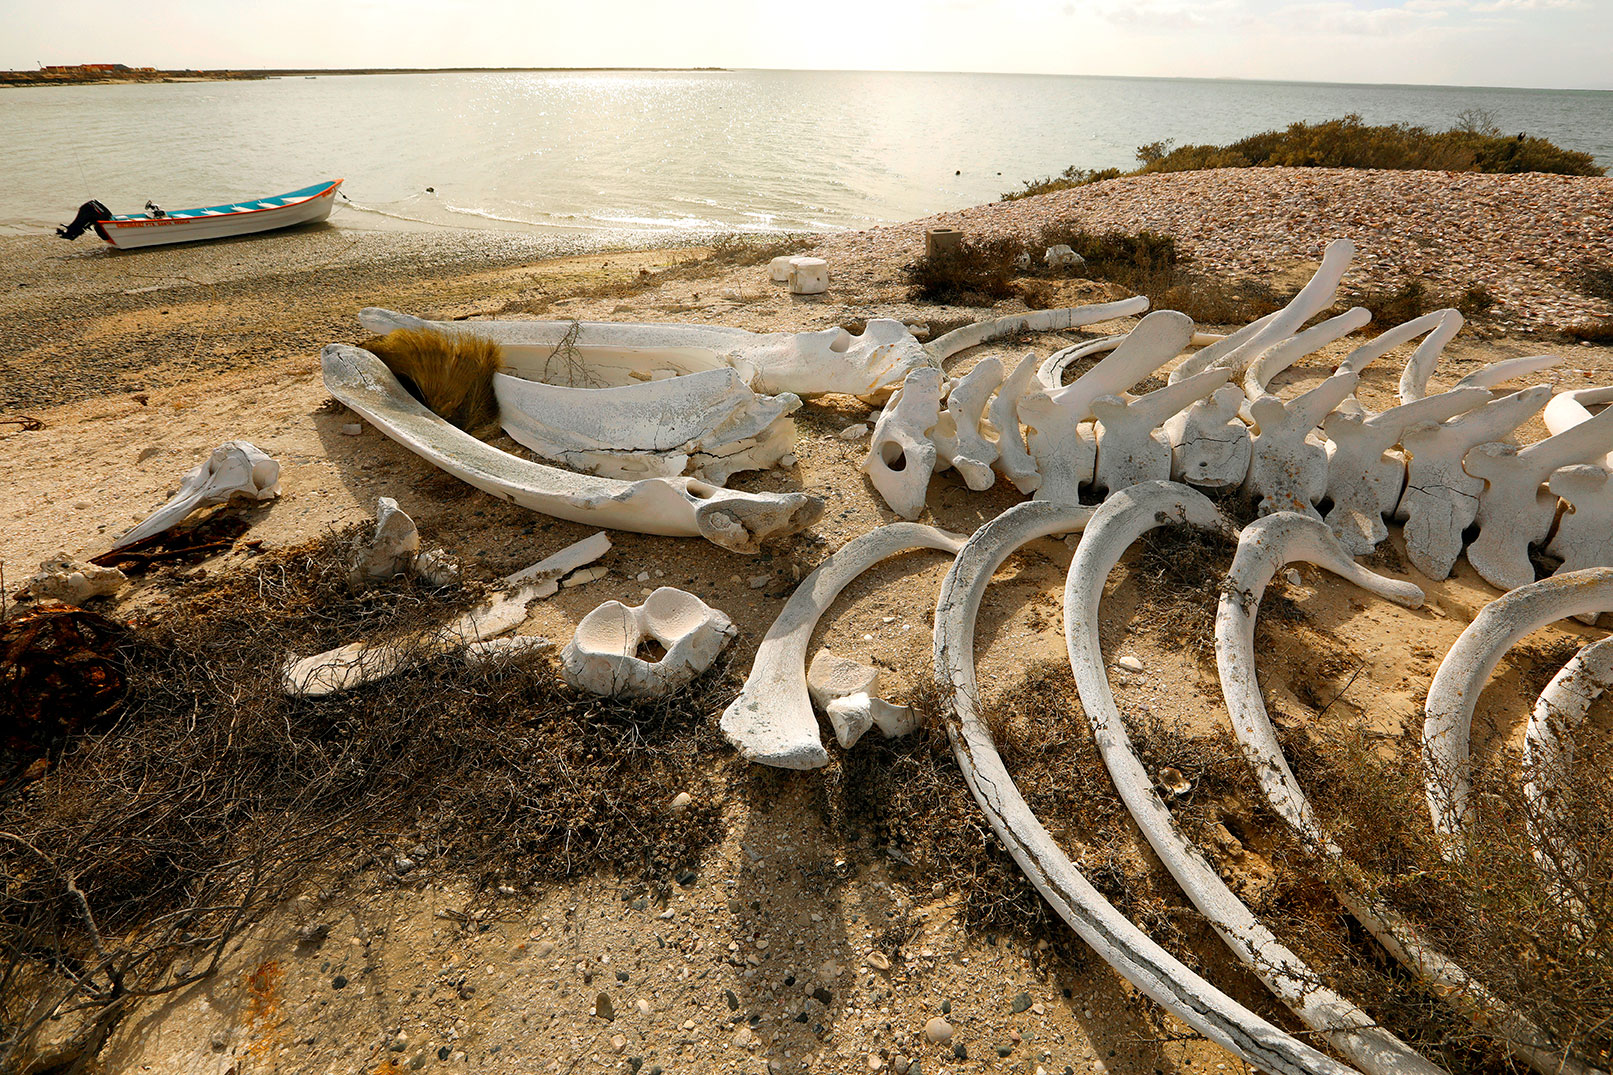 Gray whale bones rest on a bluff in San Ignacio Lagoon, arranged by locals to show visitors the size of the creatures, which average 40 feet long.